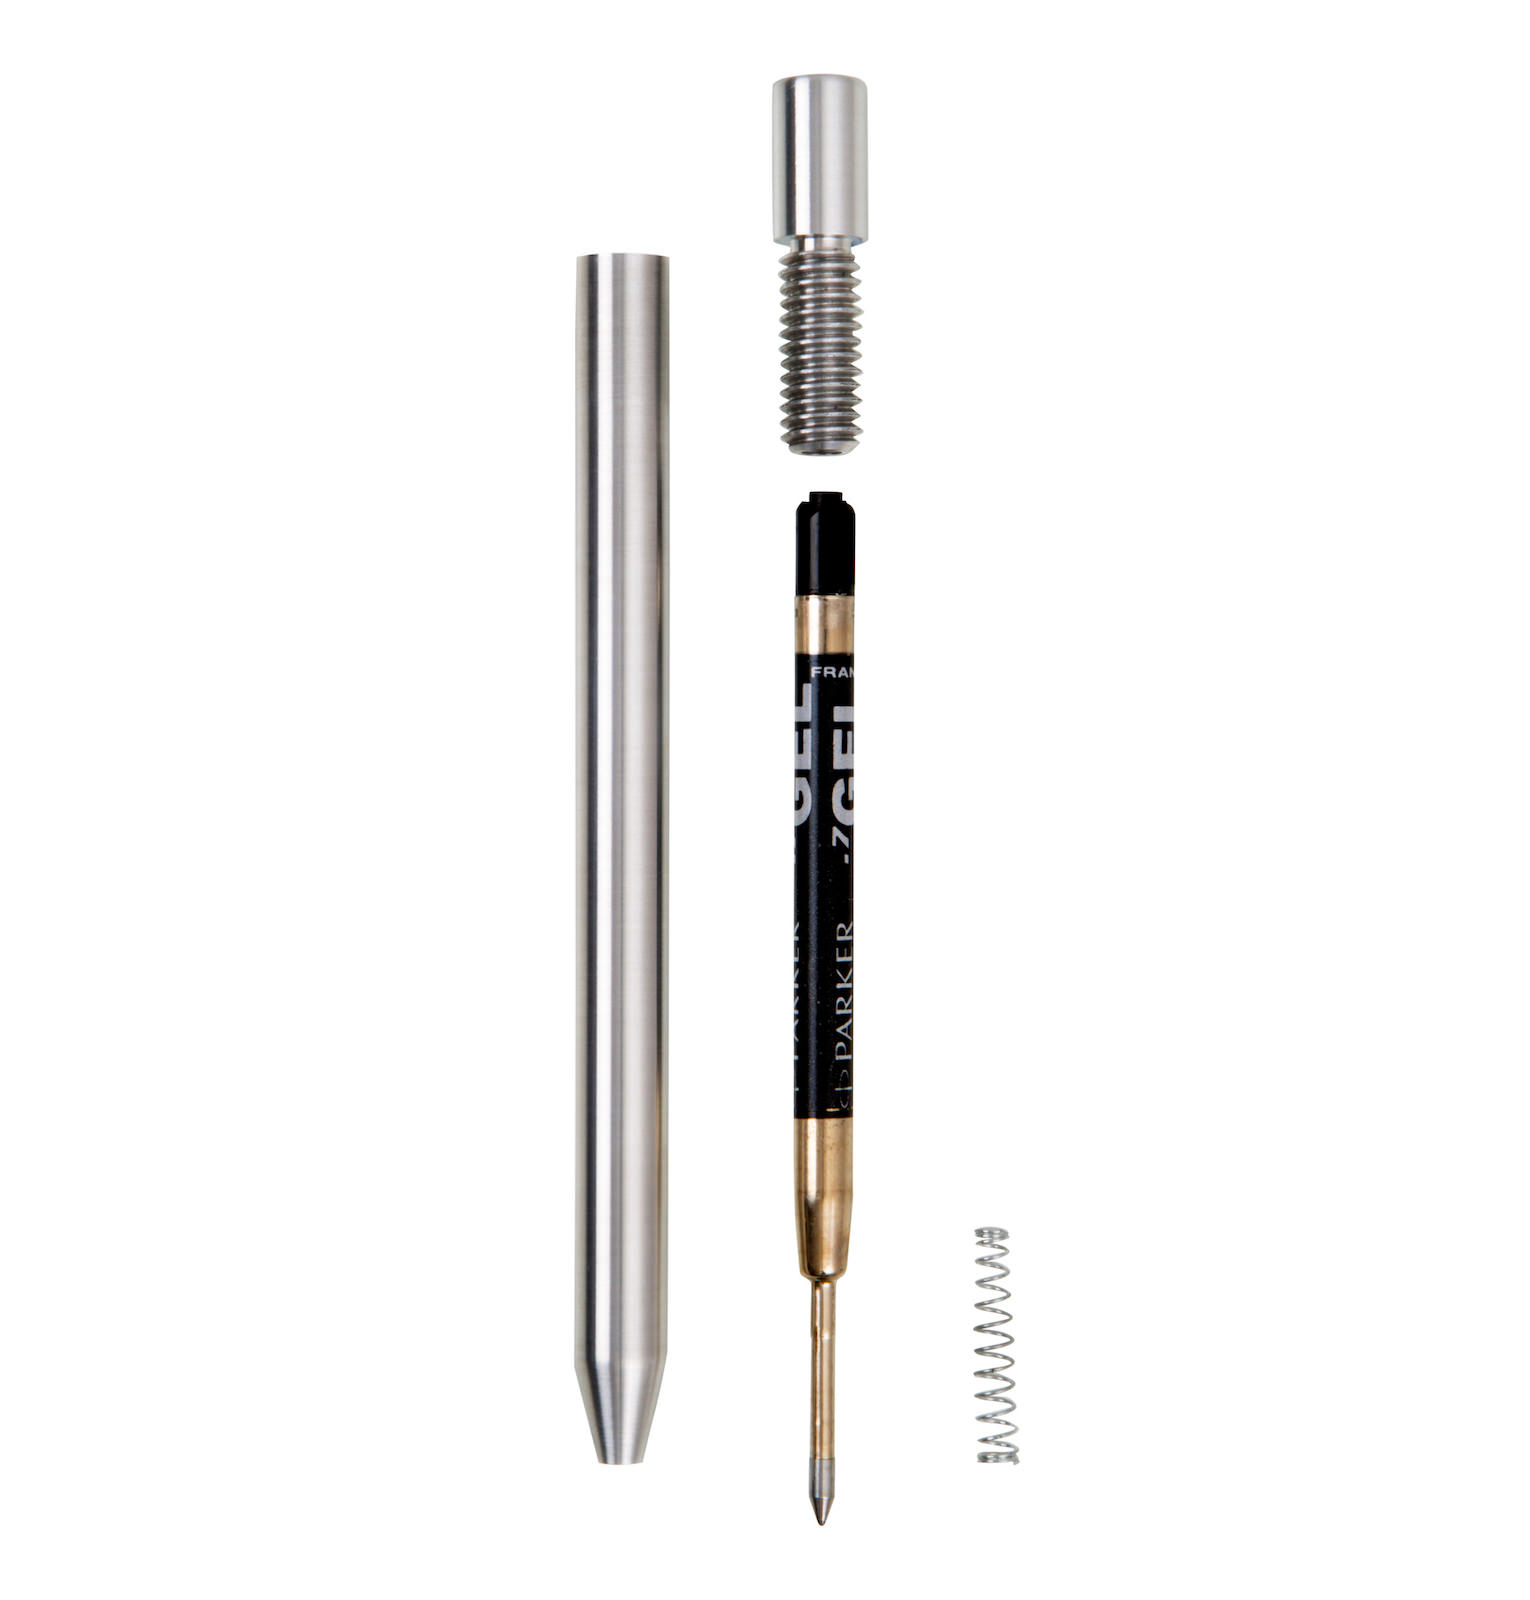 The BaughbLabs Aluminum Pen - Machined From A Solid 6061-T6 Aluminum Rod